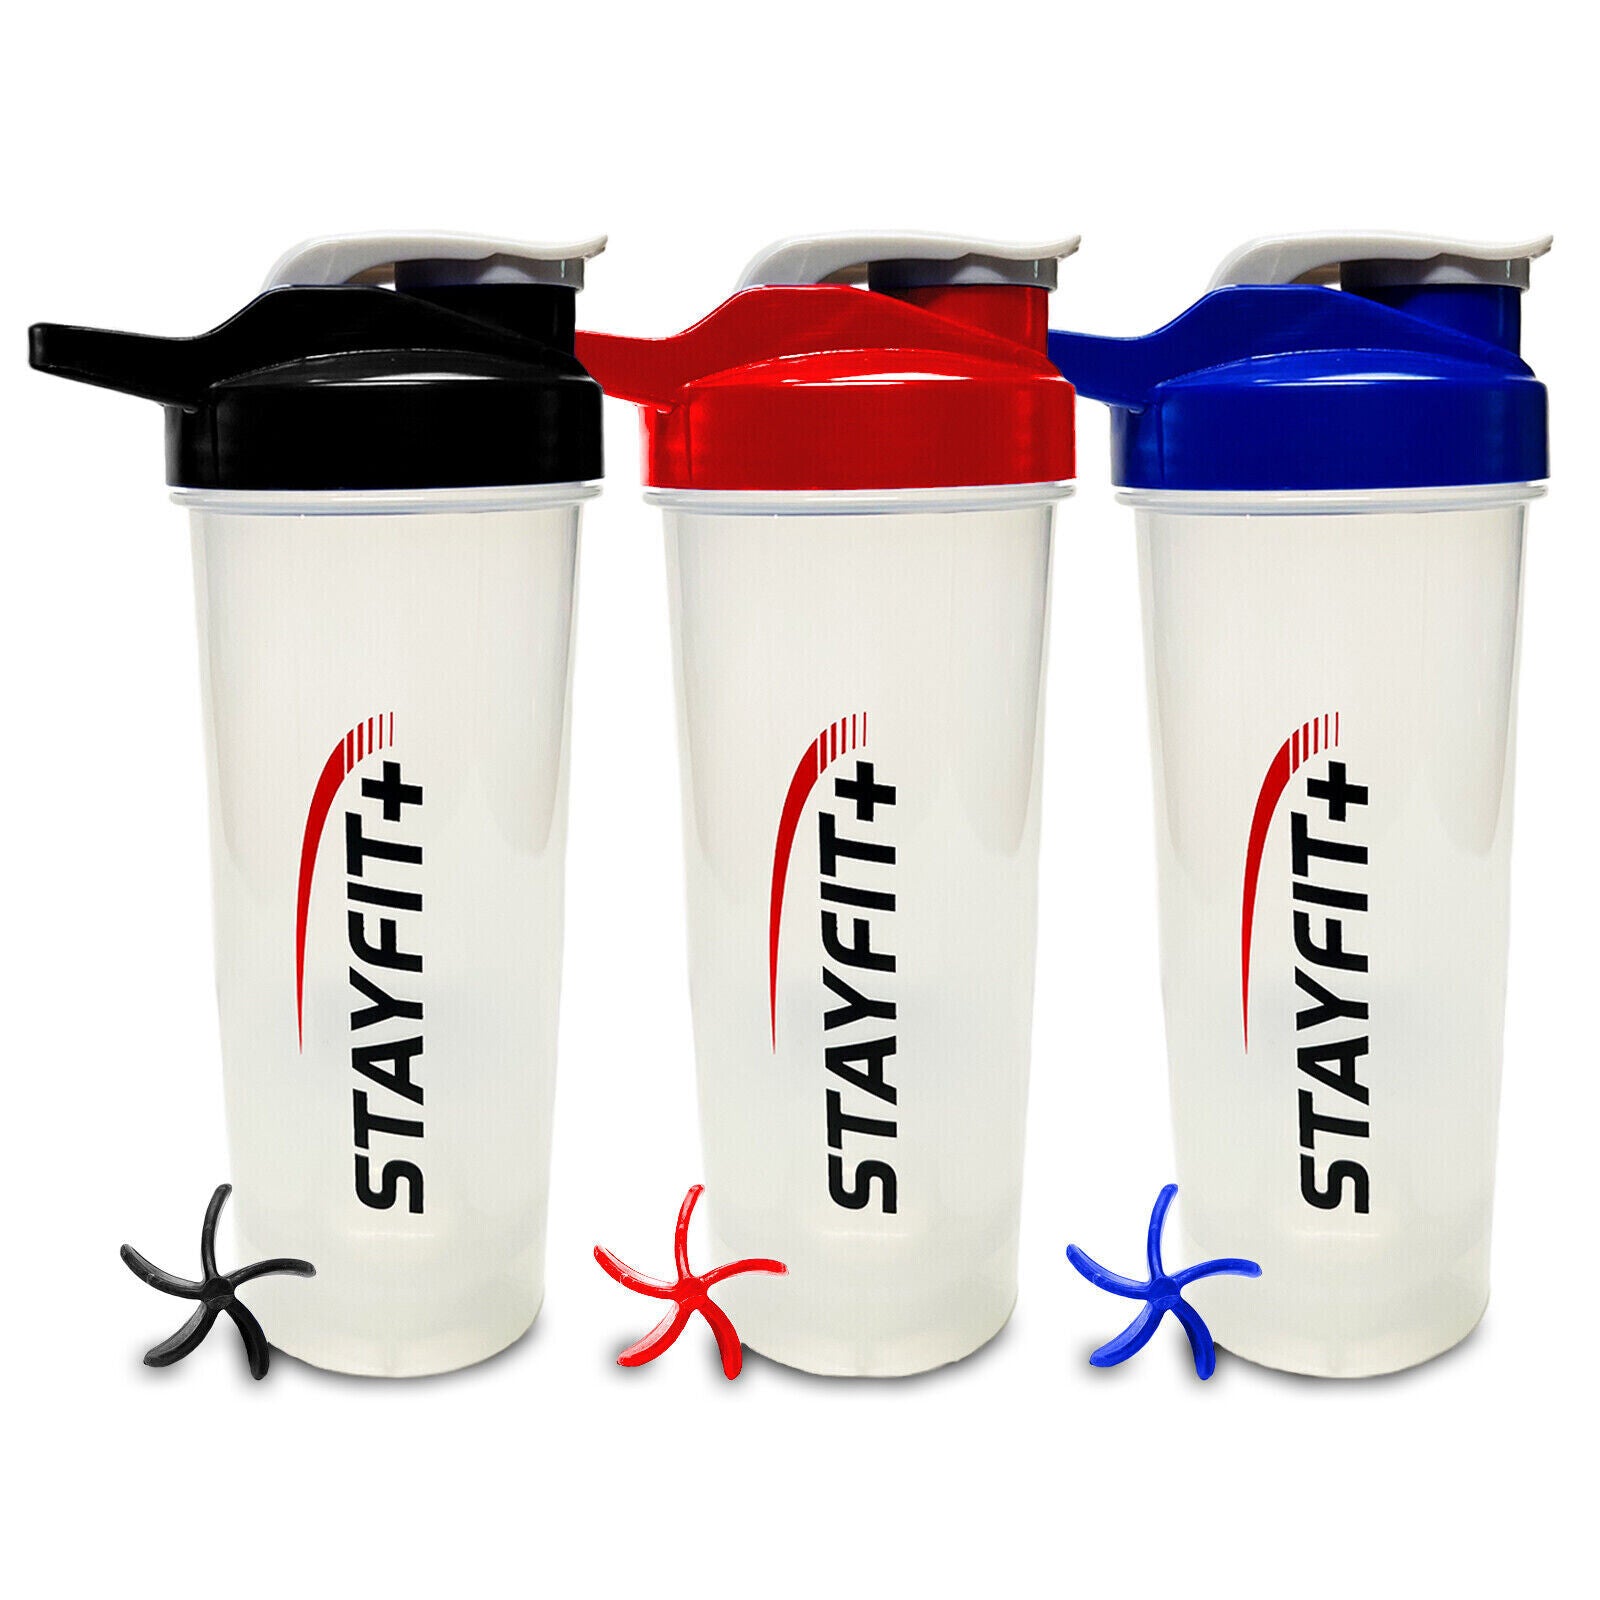 4879 700ml Protein Shaker Bottle with Powder Storage 3-Compartment